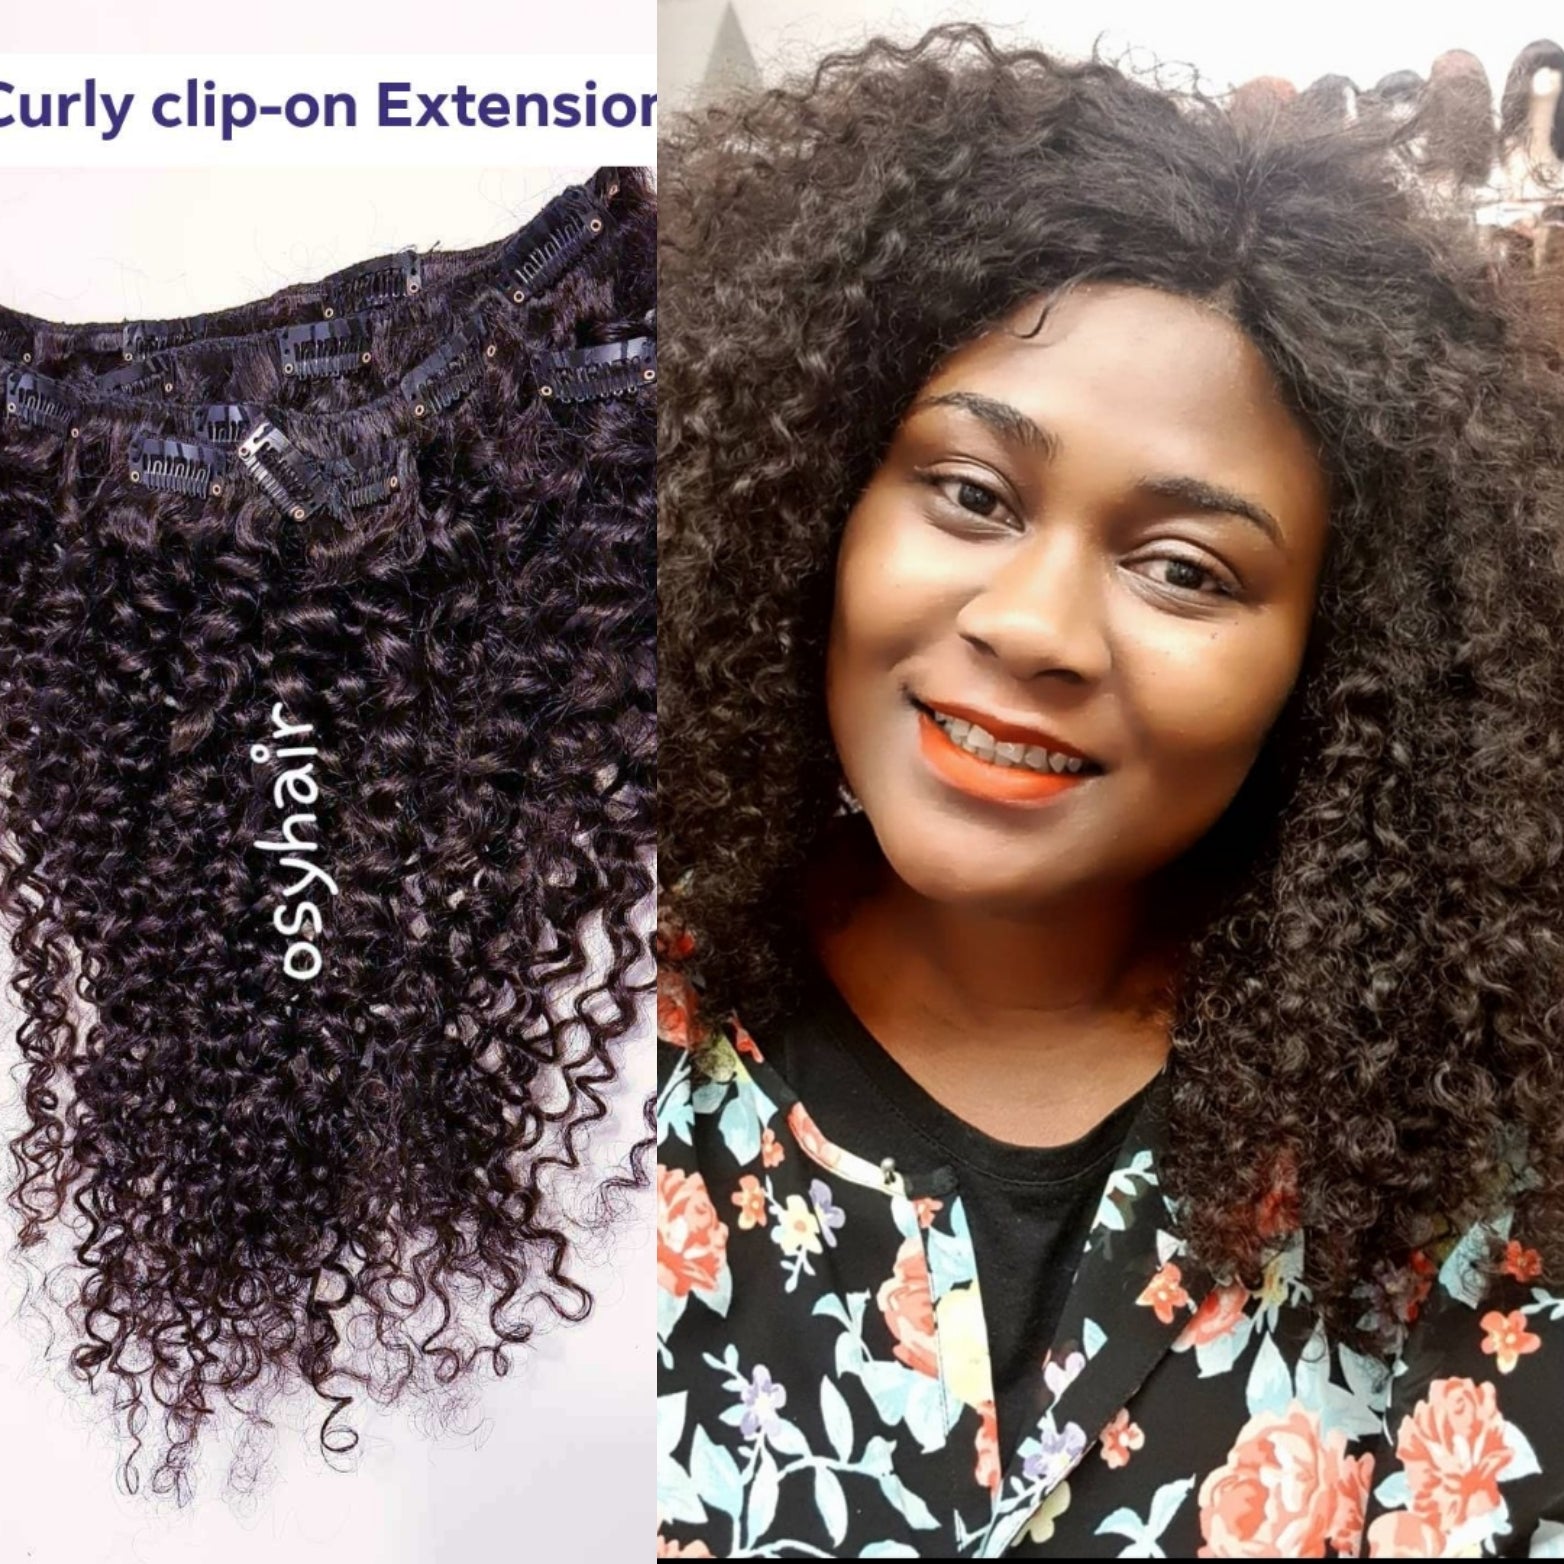 Love curl clip-on Extension